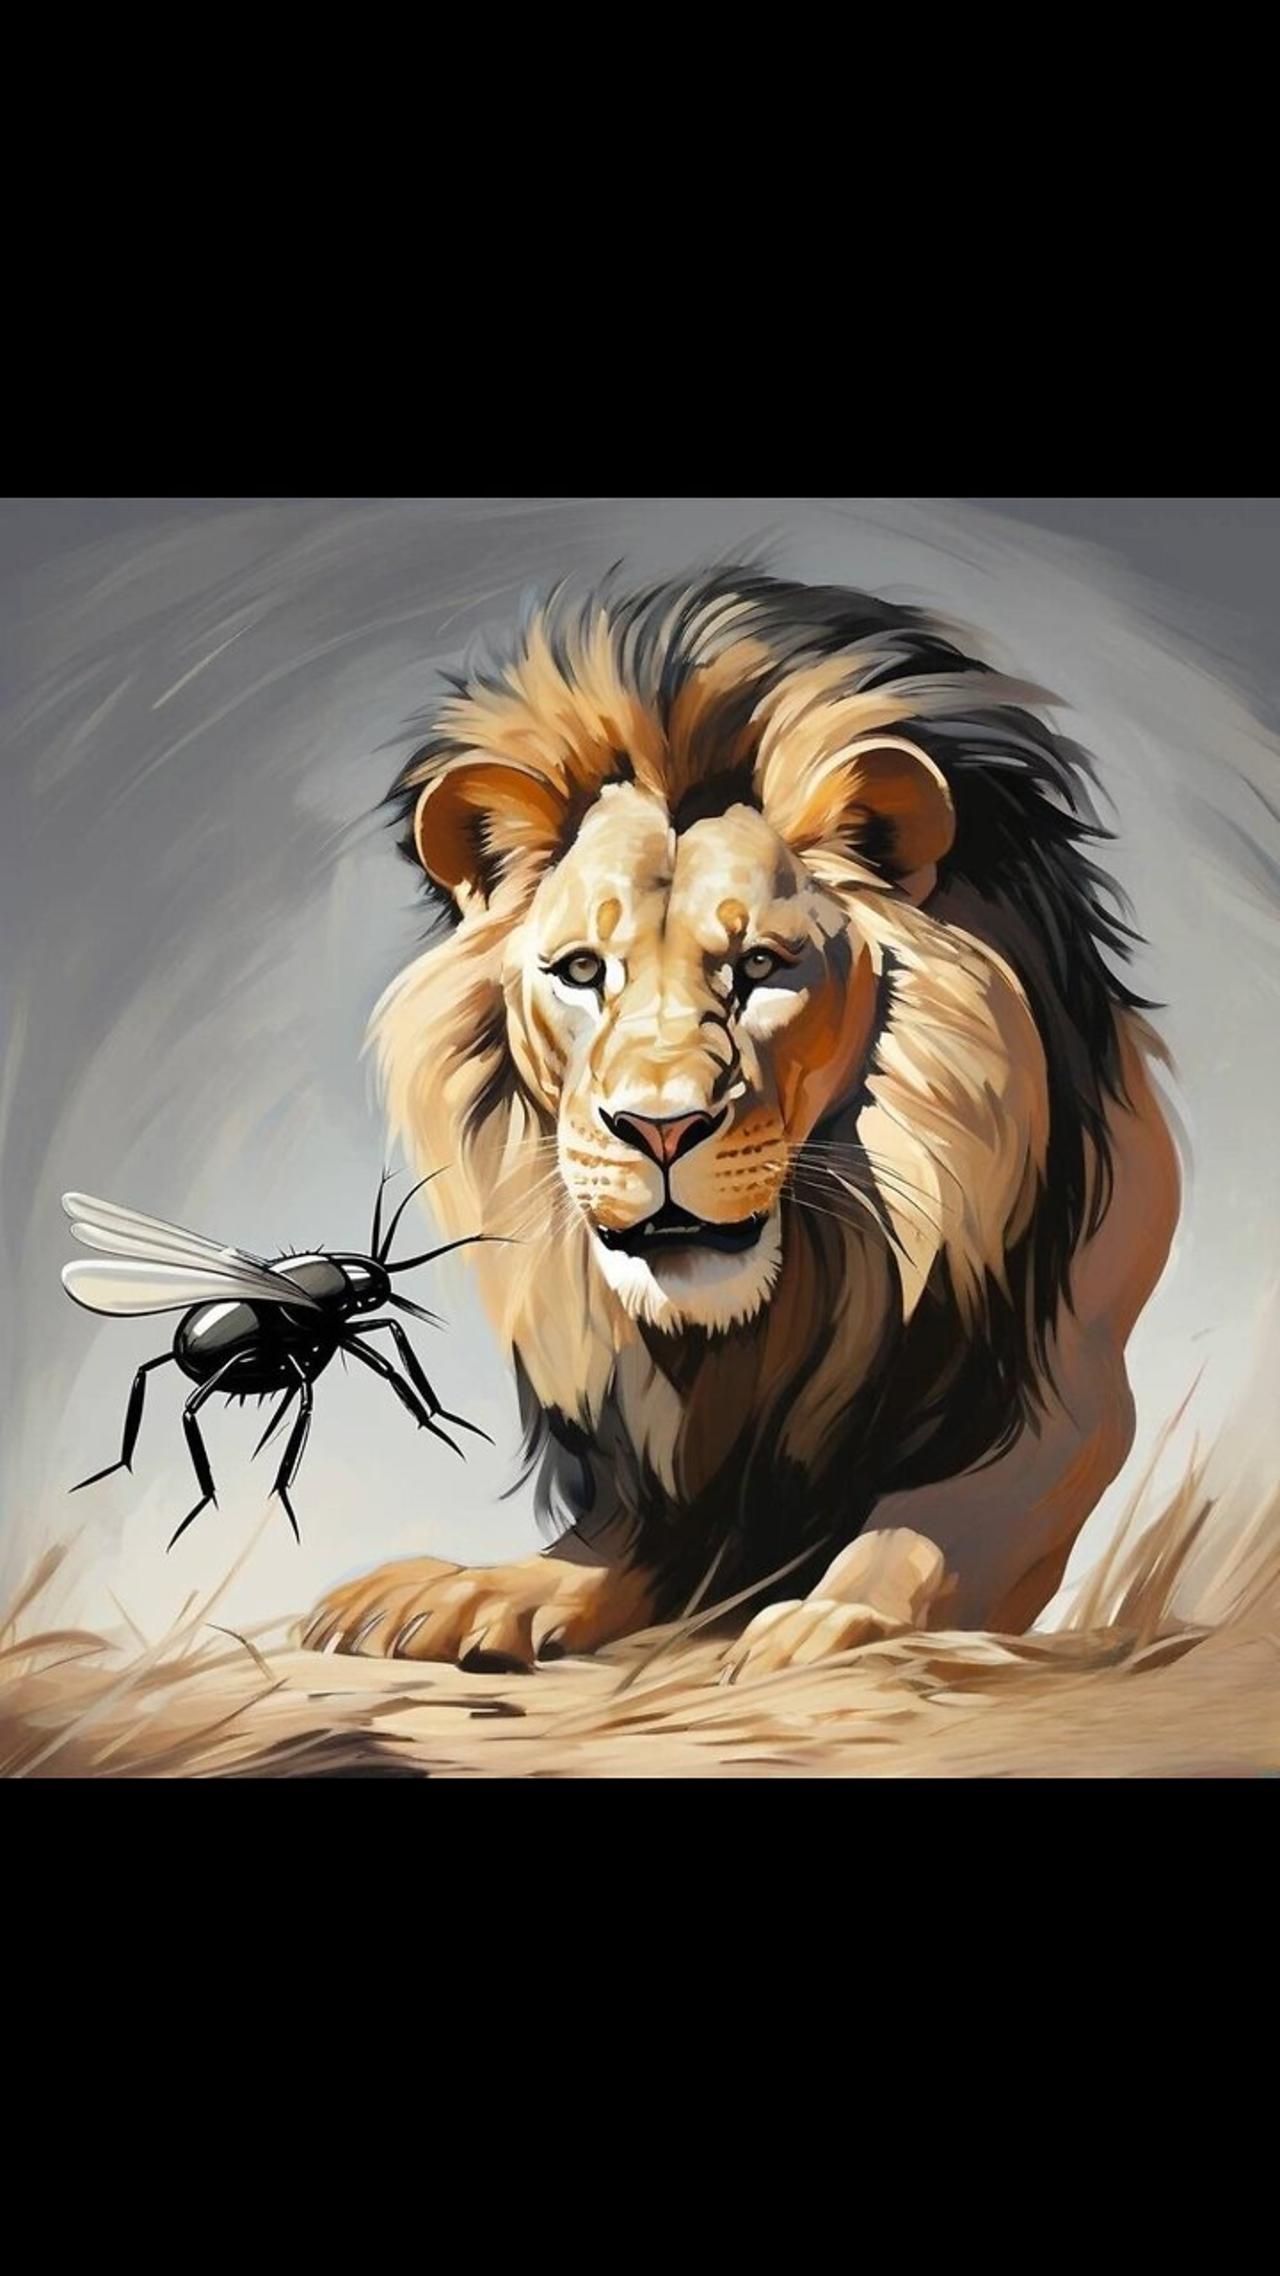 Mosquito and Lion